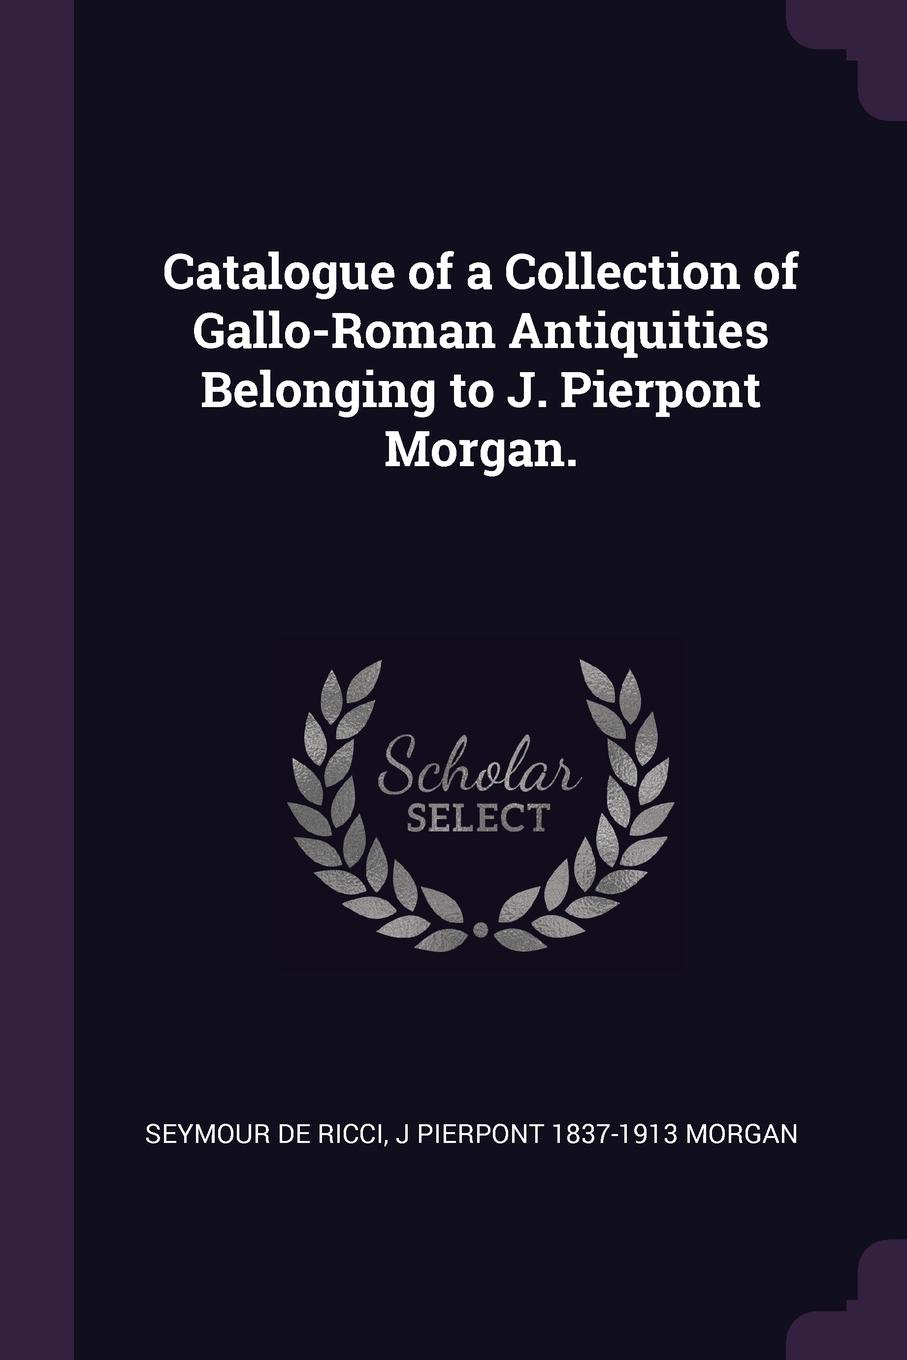 Catalogue of a Collection of Gallo-Roman Antiquities Belonging to J. Pierpont Morgan.